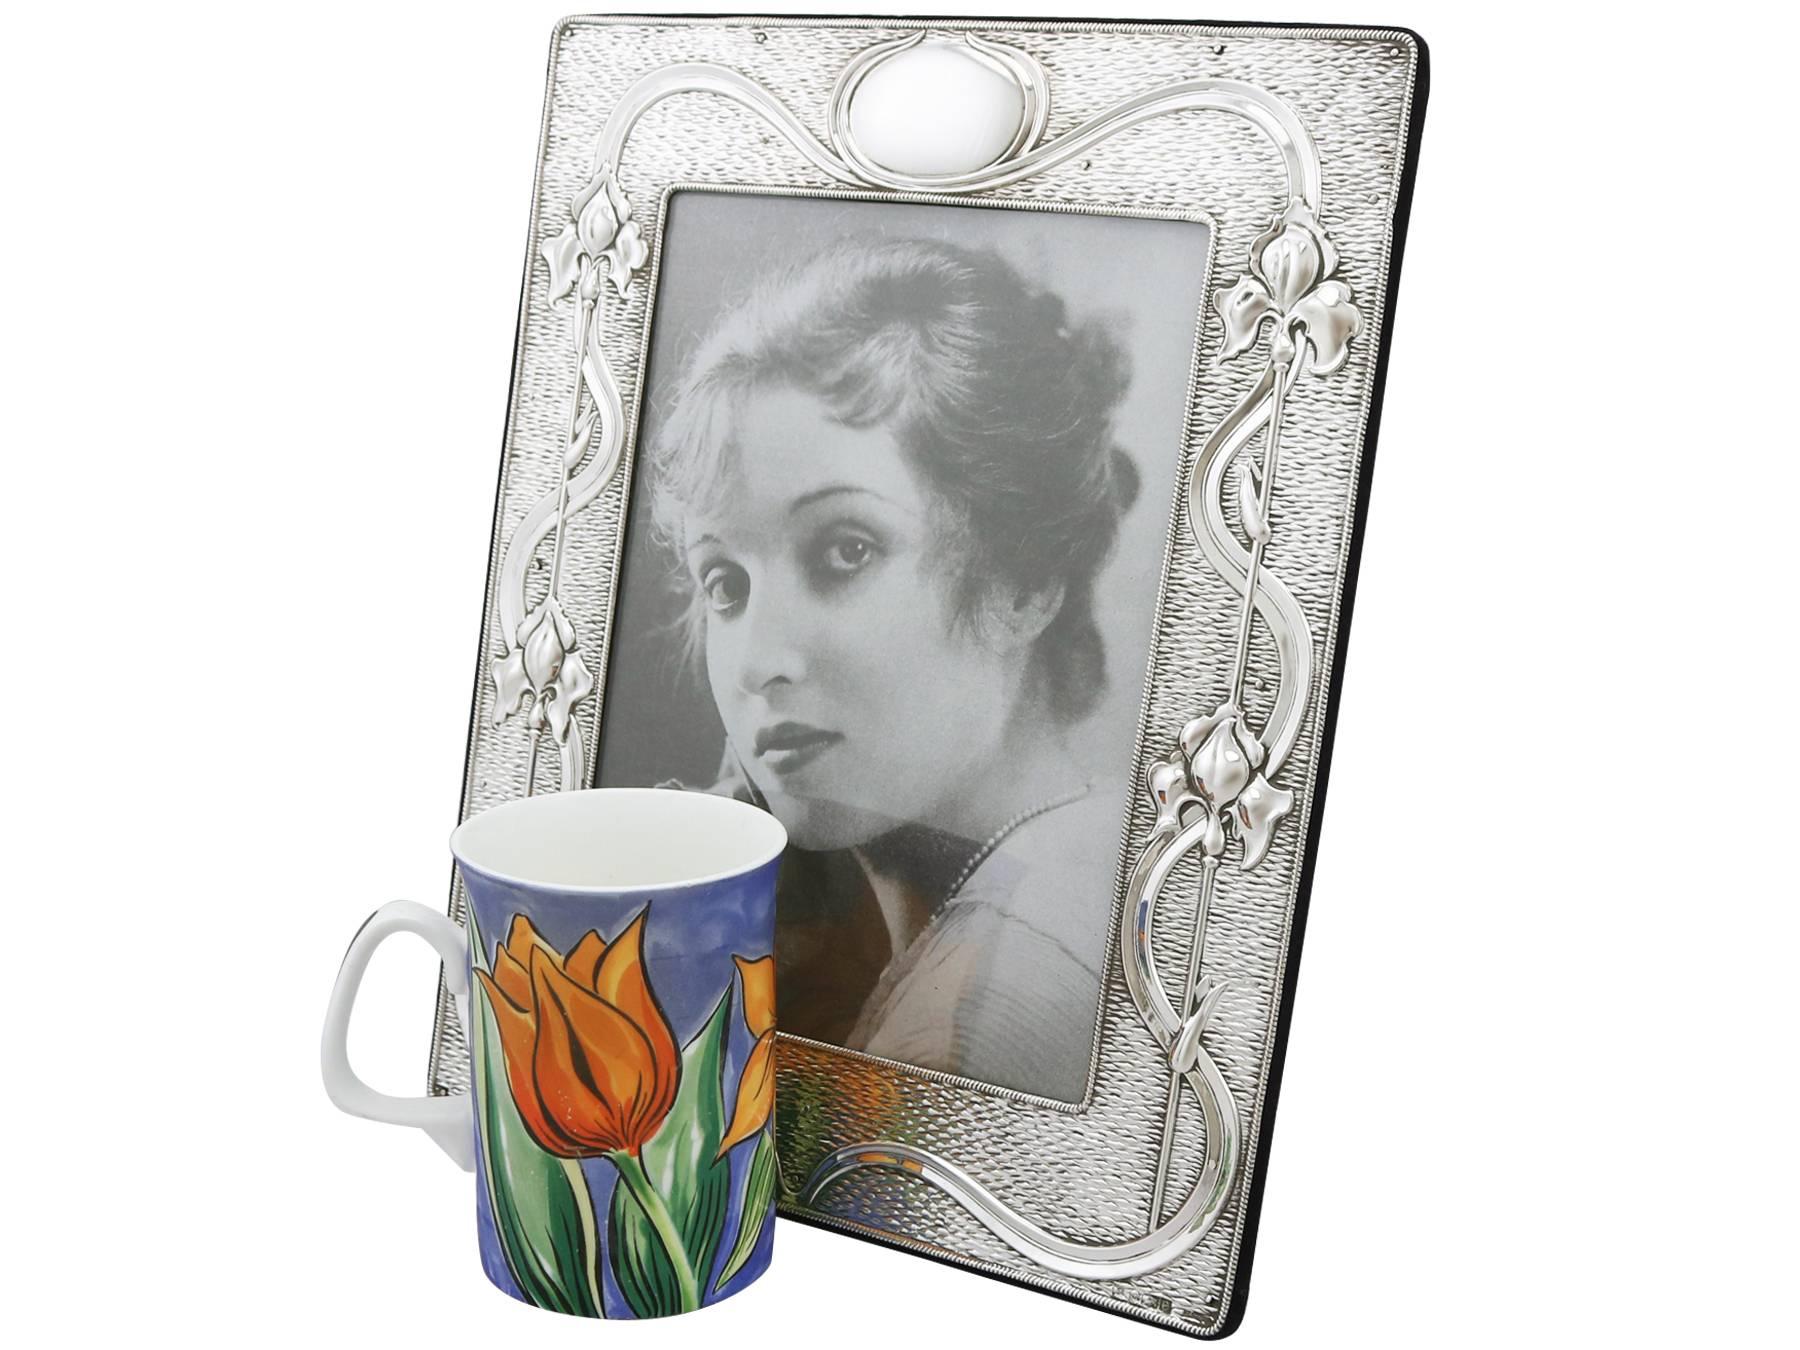 An exceptional, fine and impressive antique Edwardian English sterling silver photograph frame in the Art Nouveau style; an addition to our ornamental silverware collection.

This exceptional antique Edwardian sterling silver photograph frame has